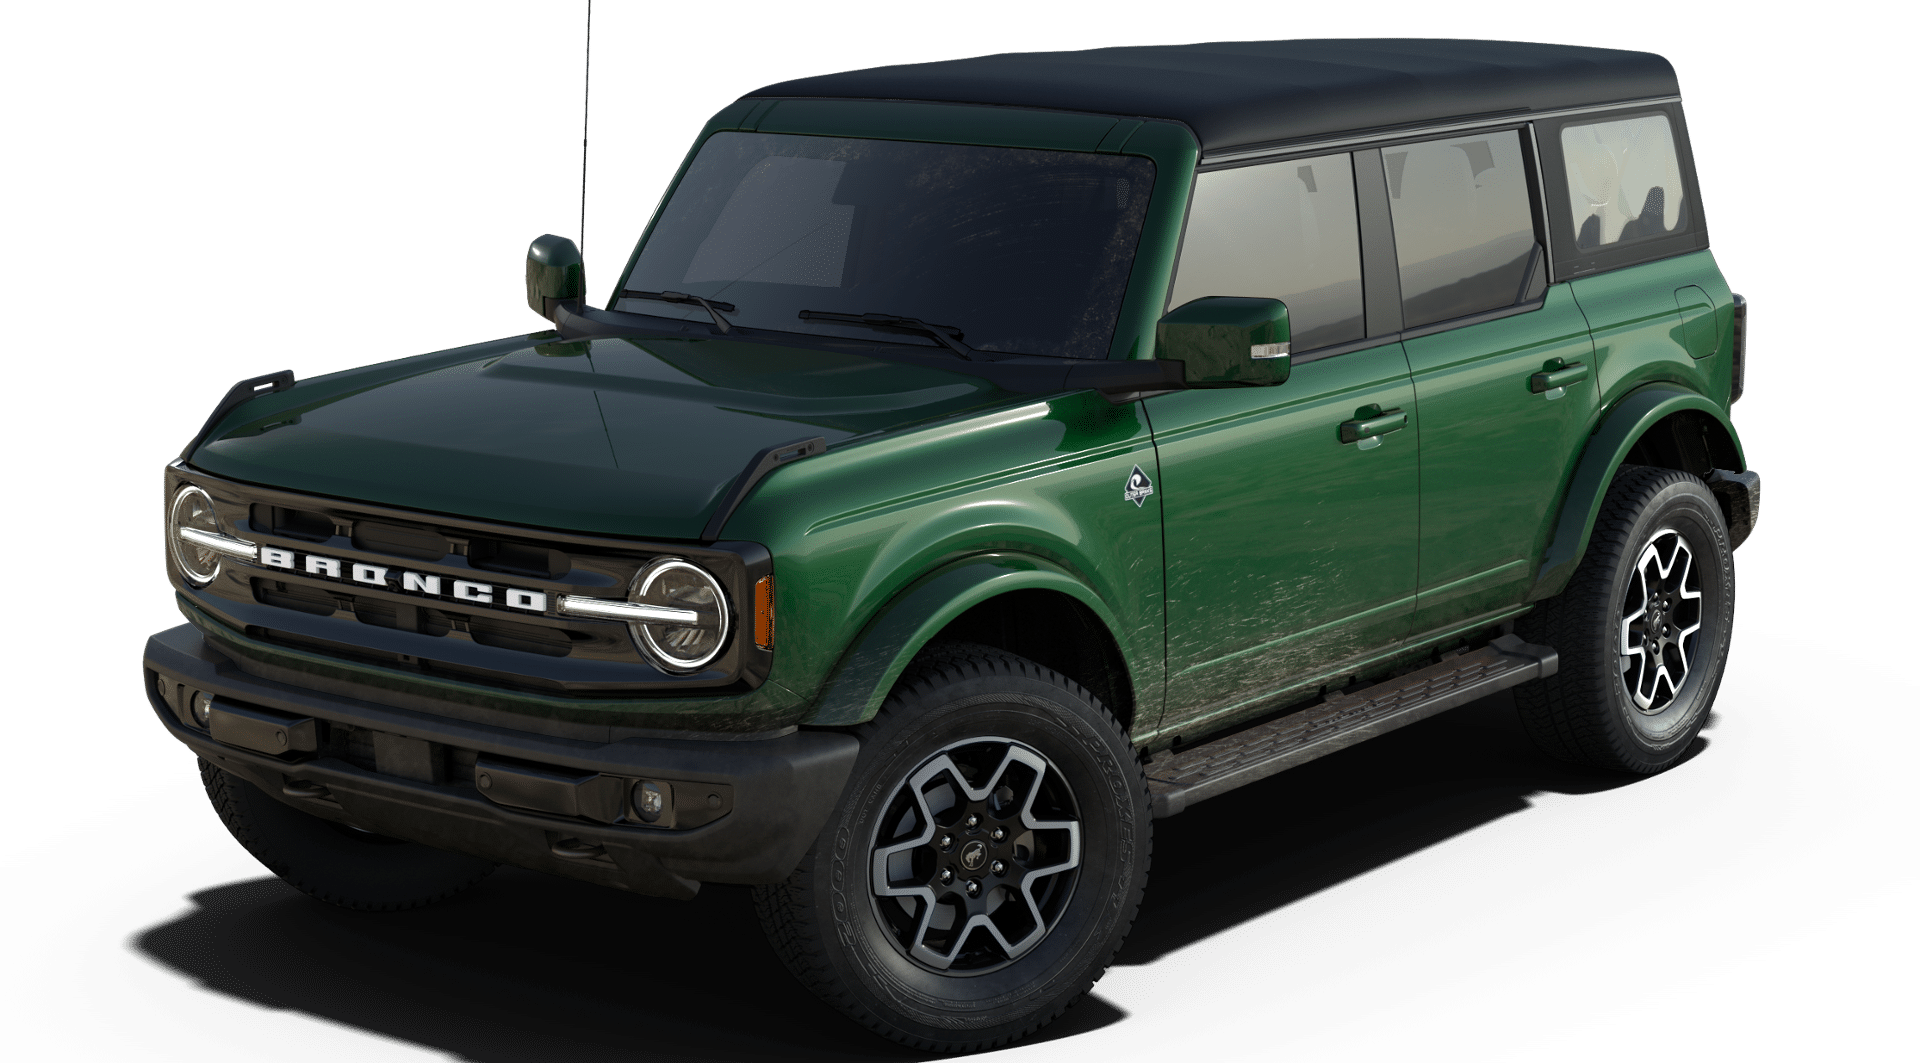 New 2022 Ford Bronco Convertible Stock: 104030